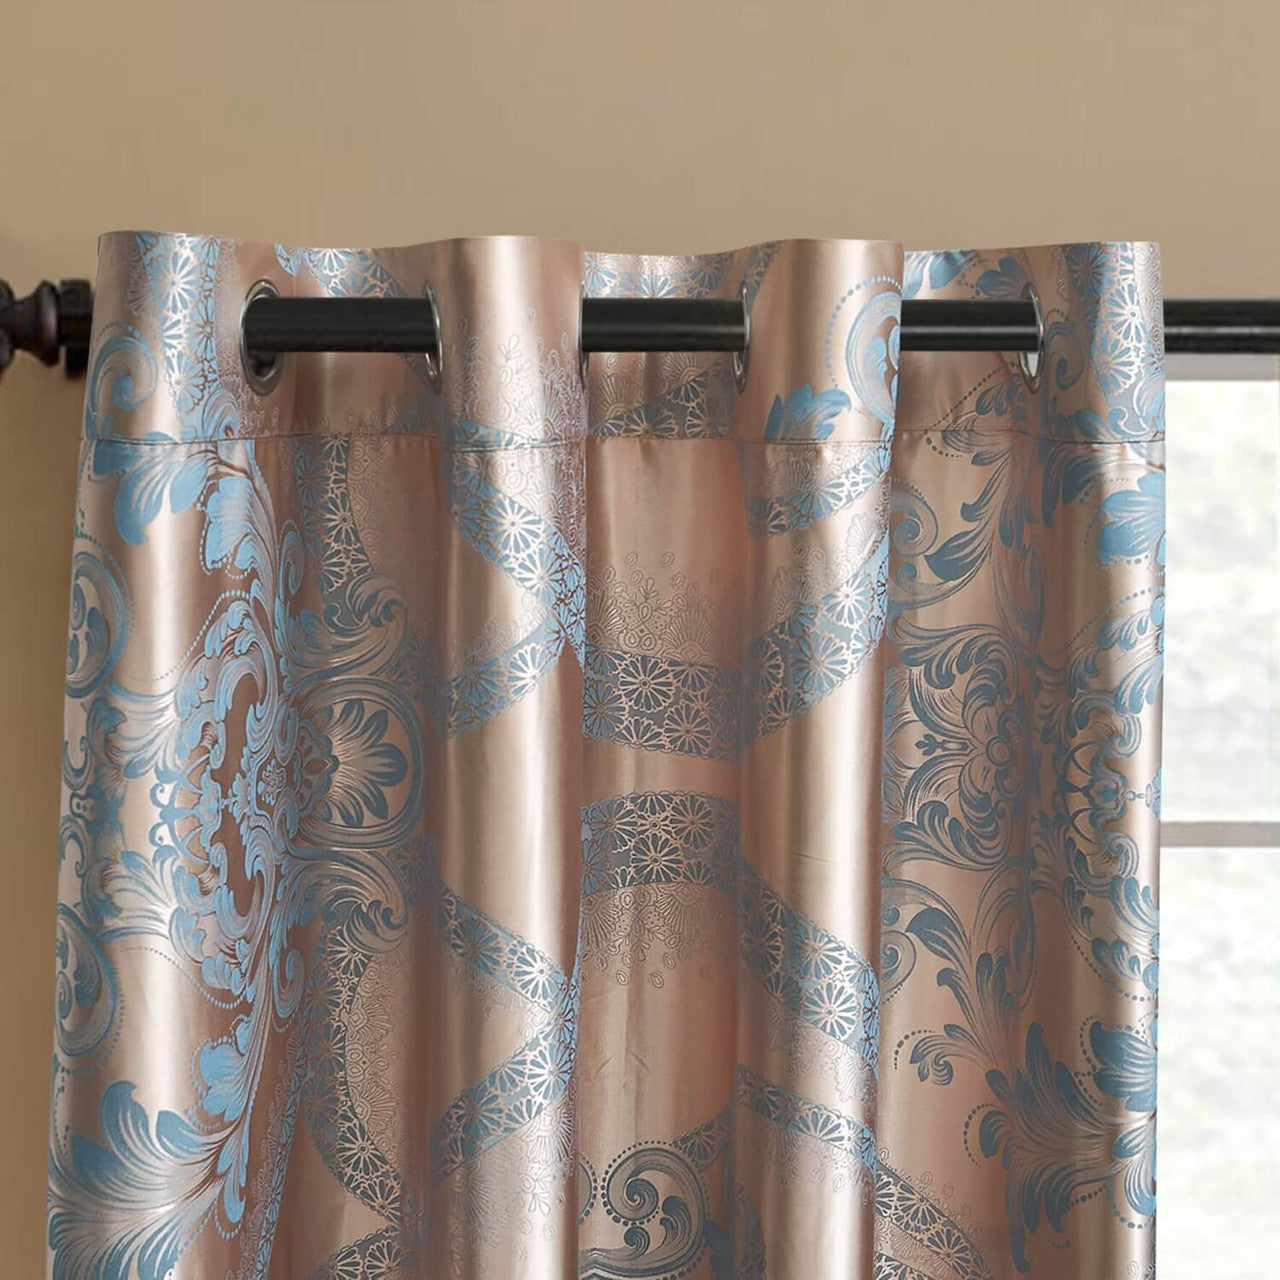 Marrakesh - Luxurious Jacquard Curtains by Dolce-Mela